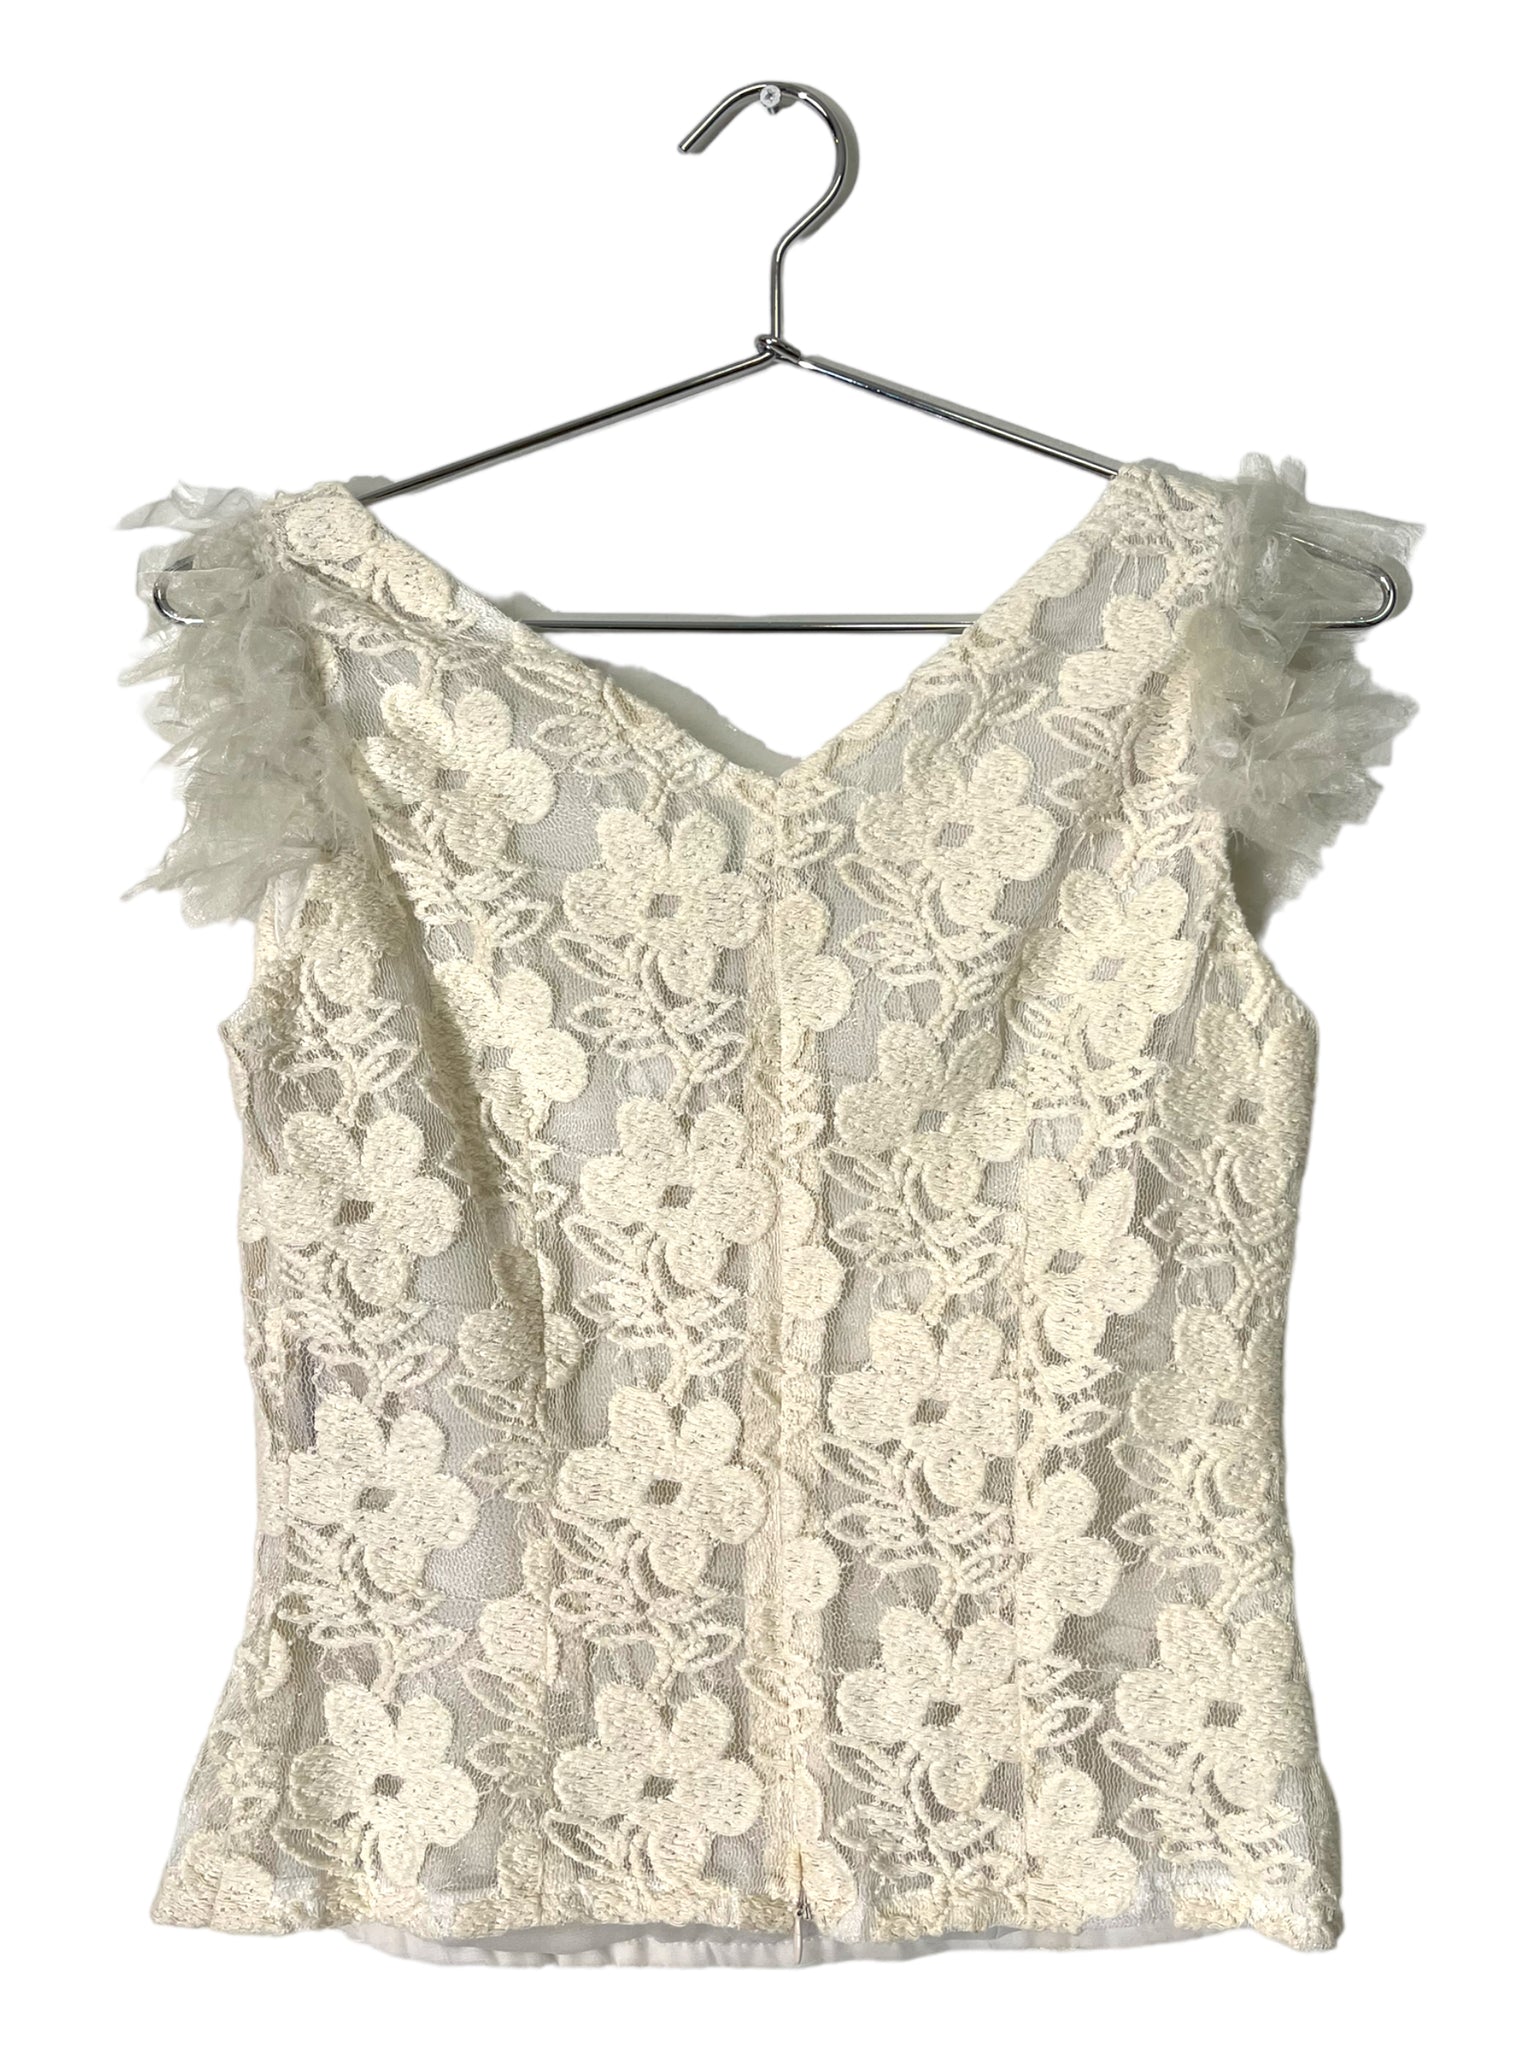 Cream Floral Lace Top with Pink Bow